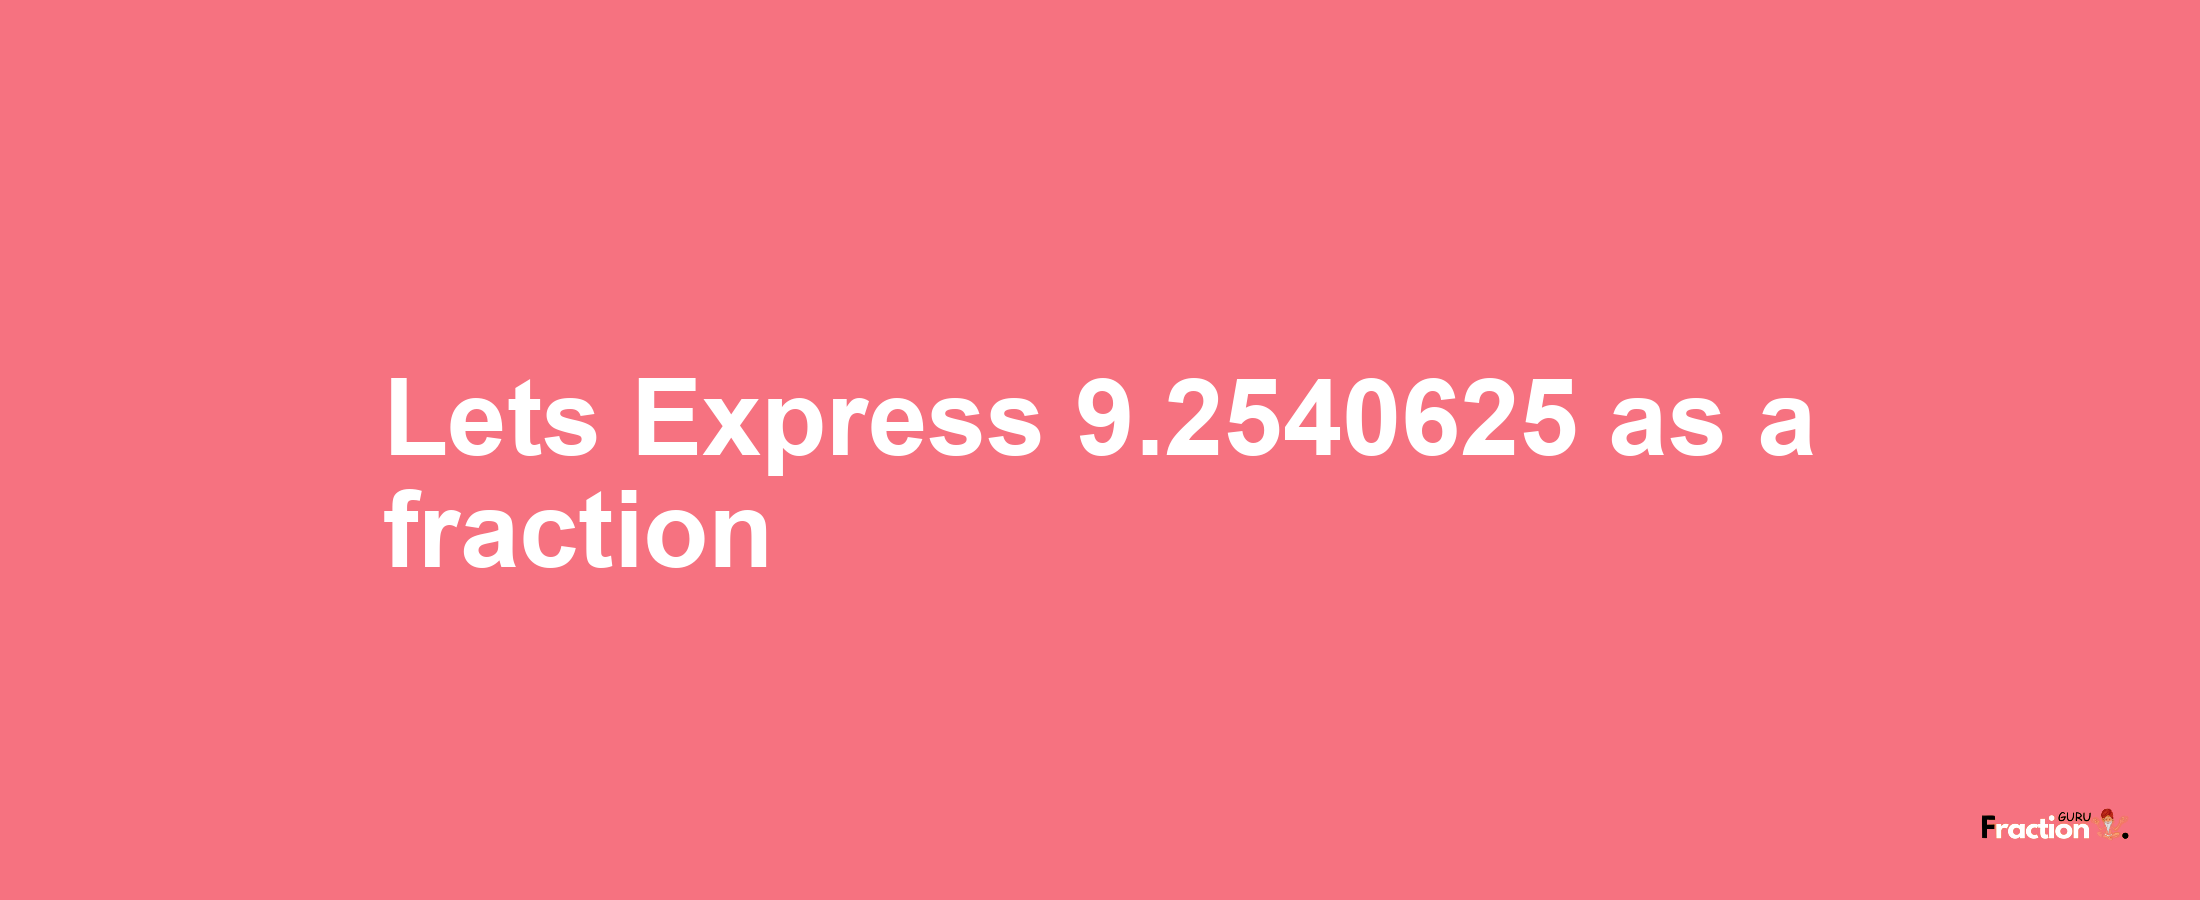 Lets Express 9.2540625 as afraction